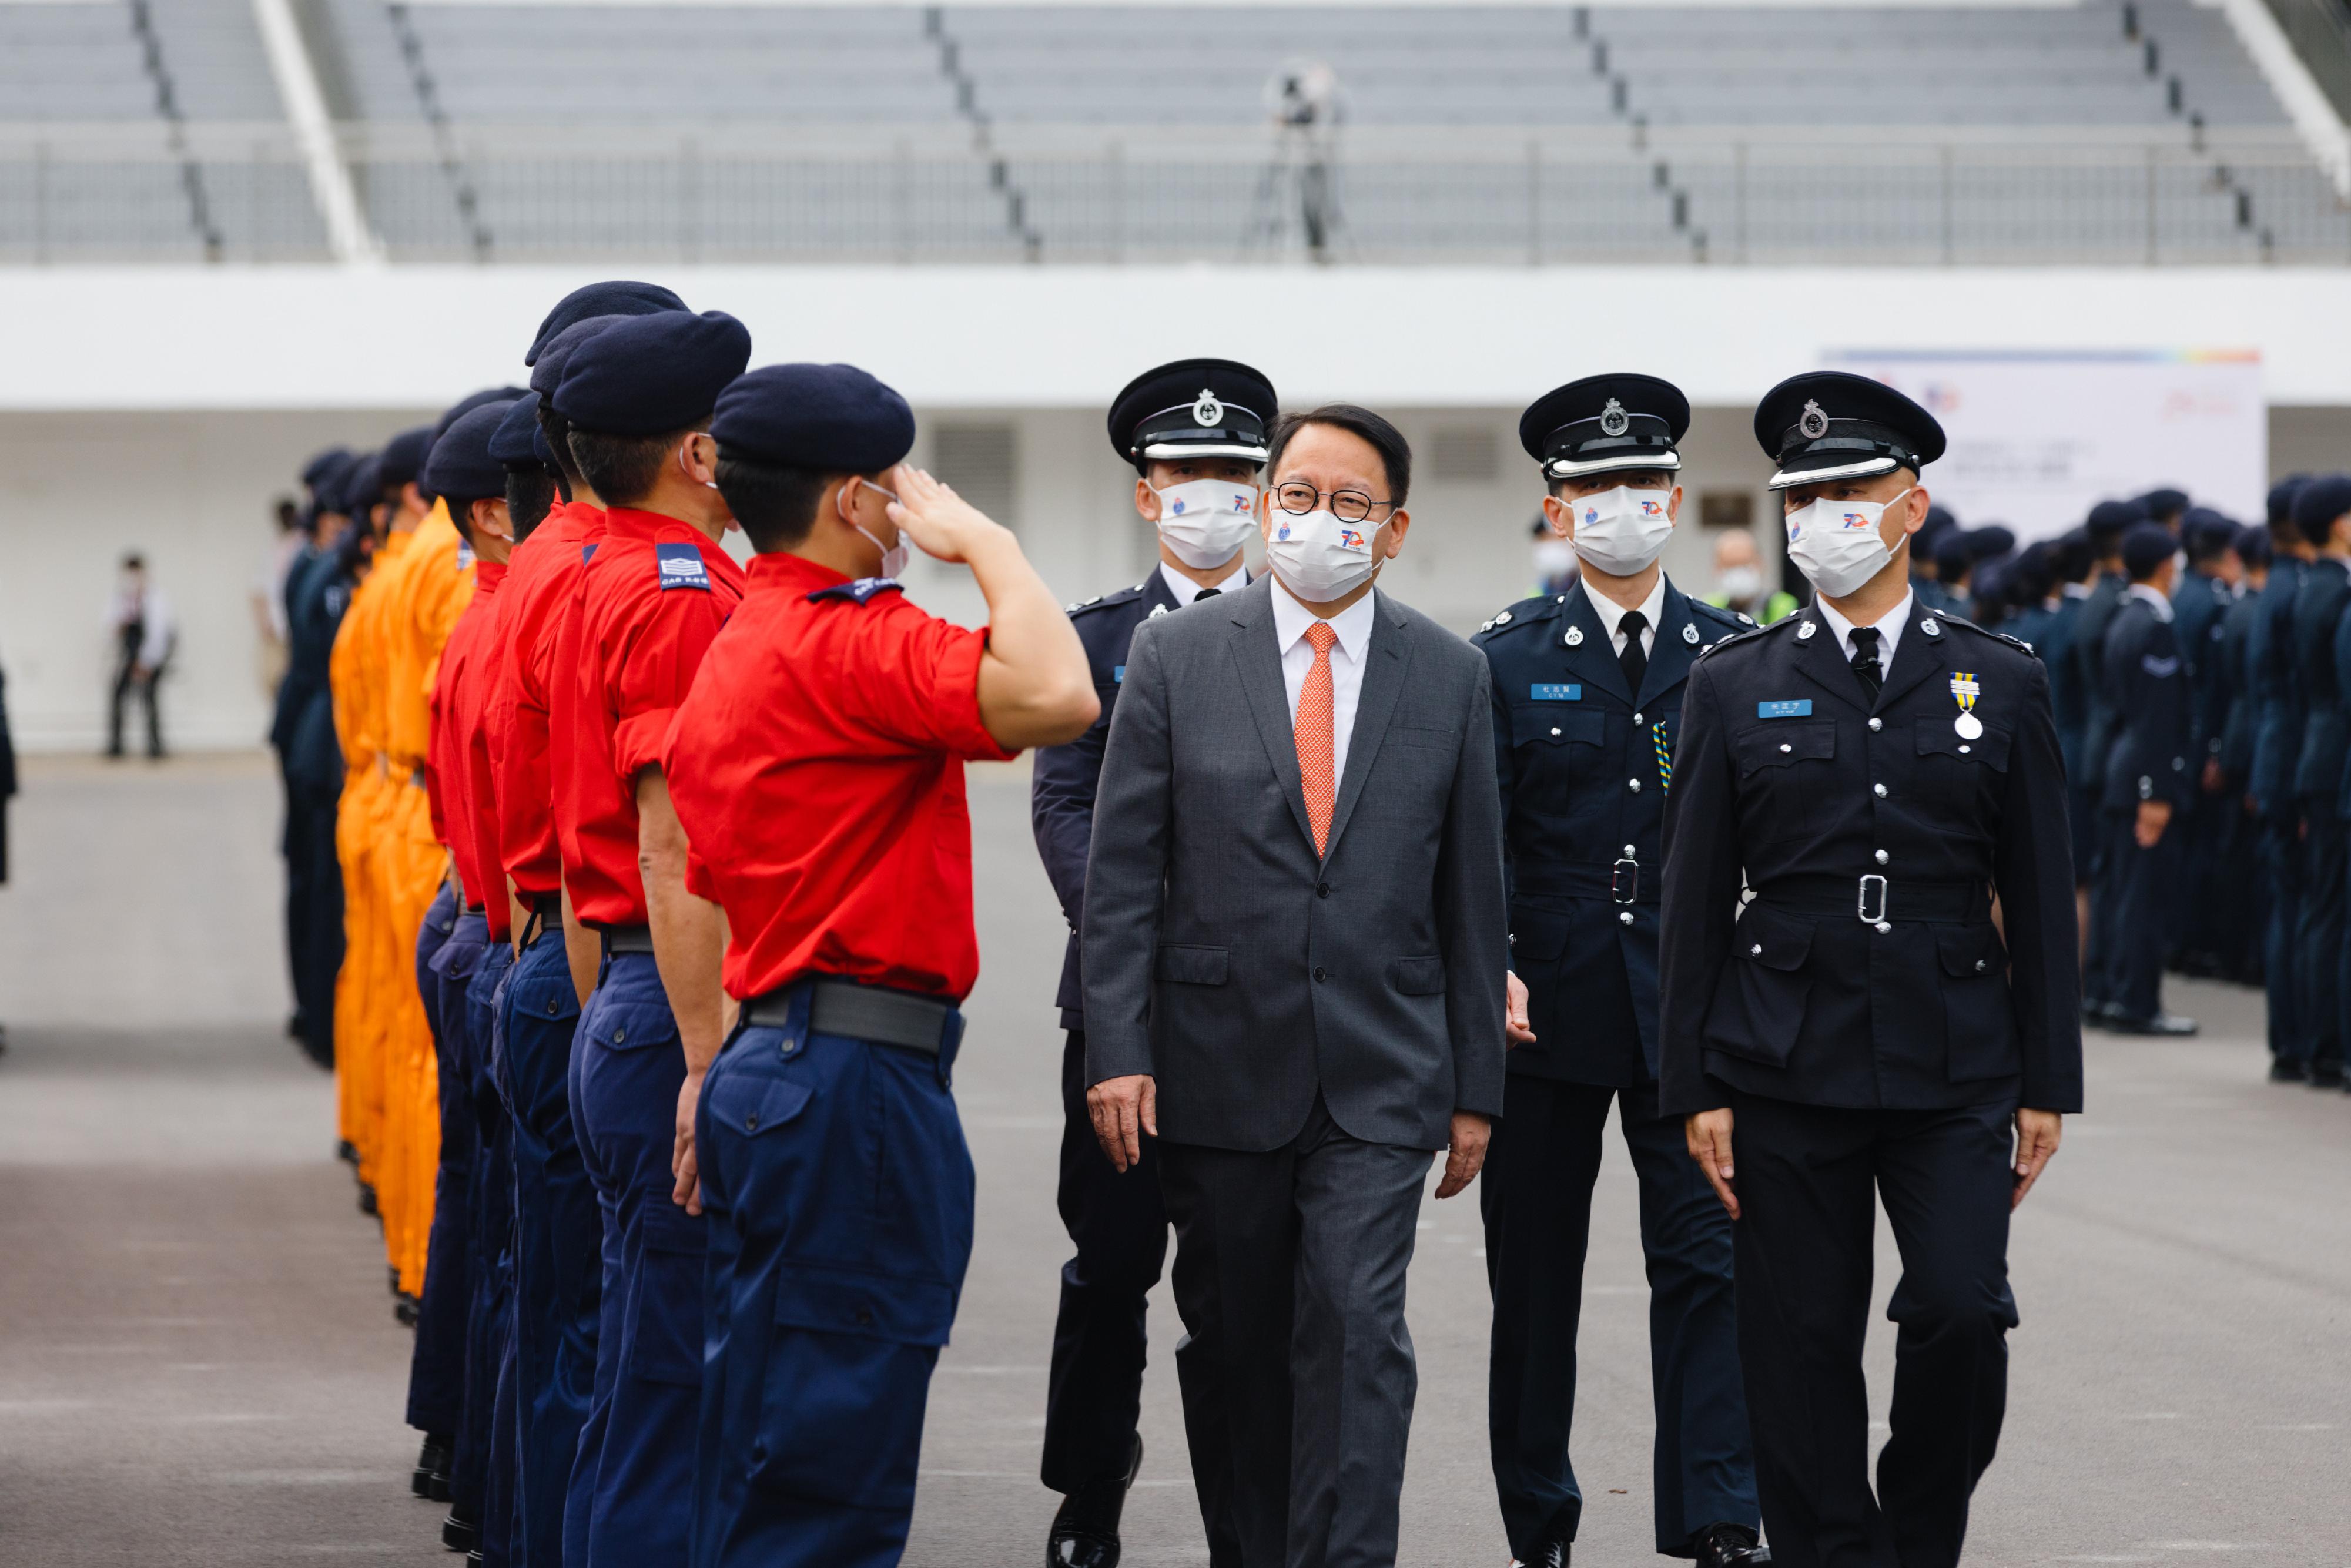 The Civil Aid Service (CAS) held the "Celebration of the 25th Anniversary of the Establishment of HKSAR and CAS 70th Anniversary Parade" today (November 27) at the Hong Kong Police College. Photo shows the Chief Secretary for Administration, Mr Chan Kwok-ki (third right), acting as the reviewing officer for the Parade.